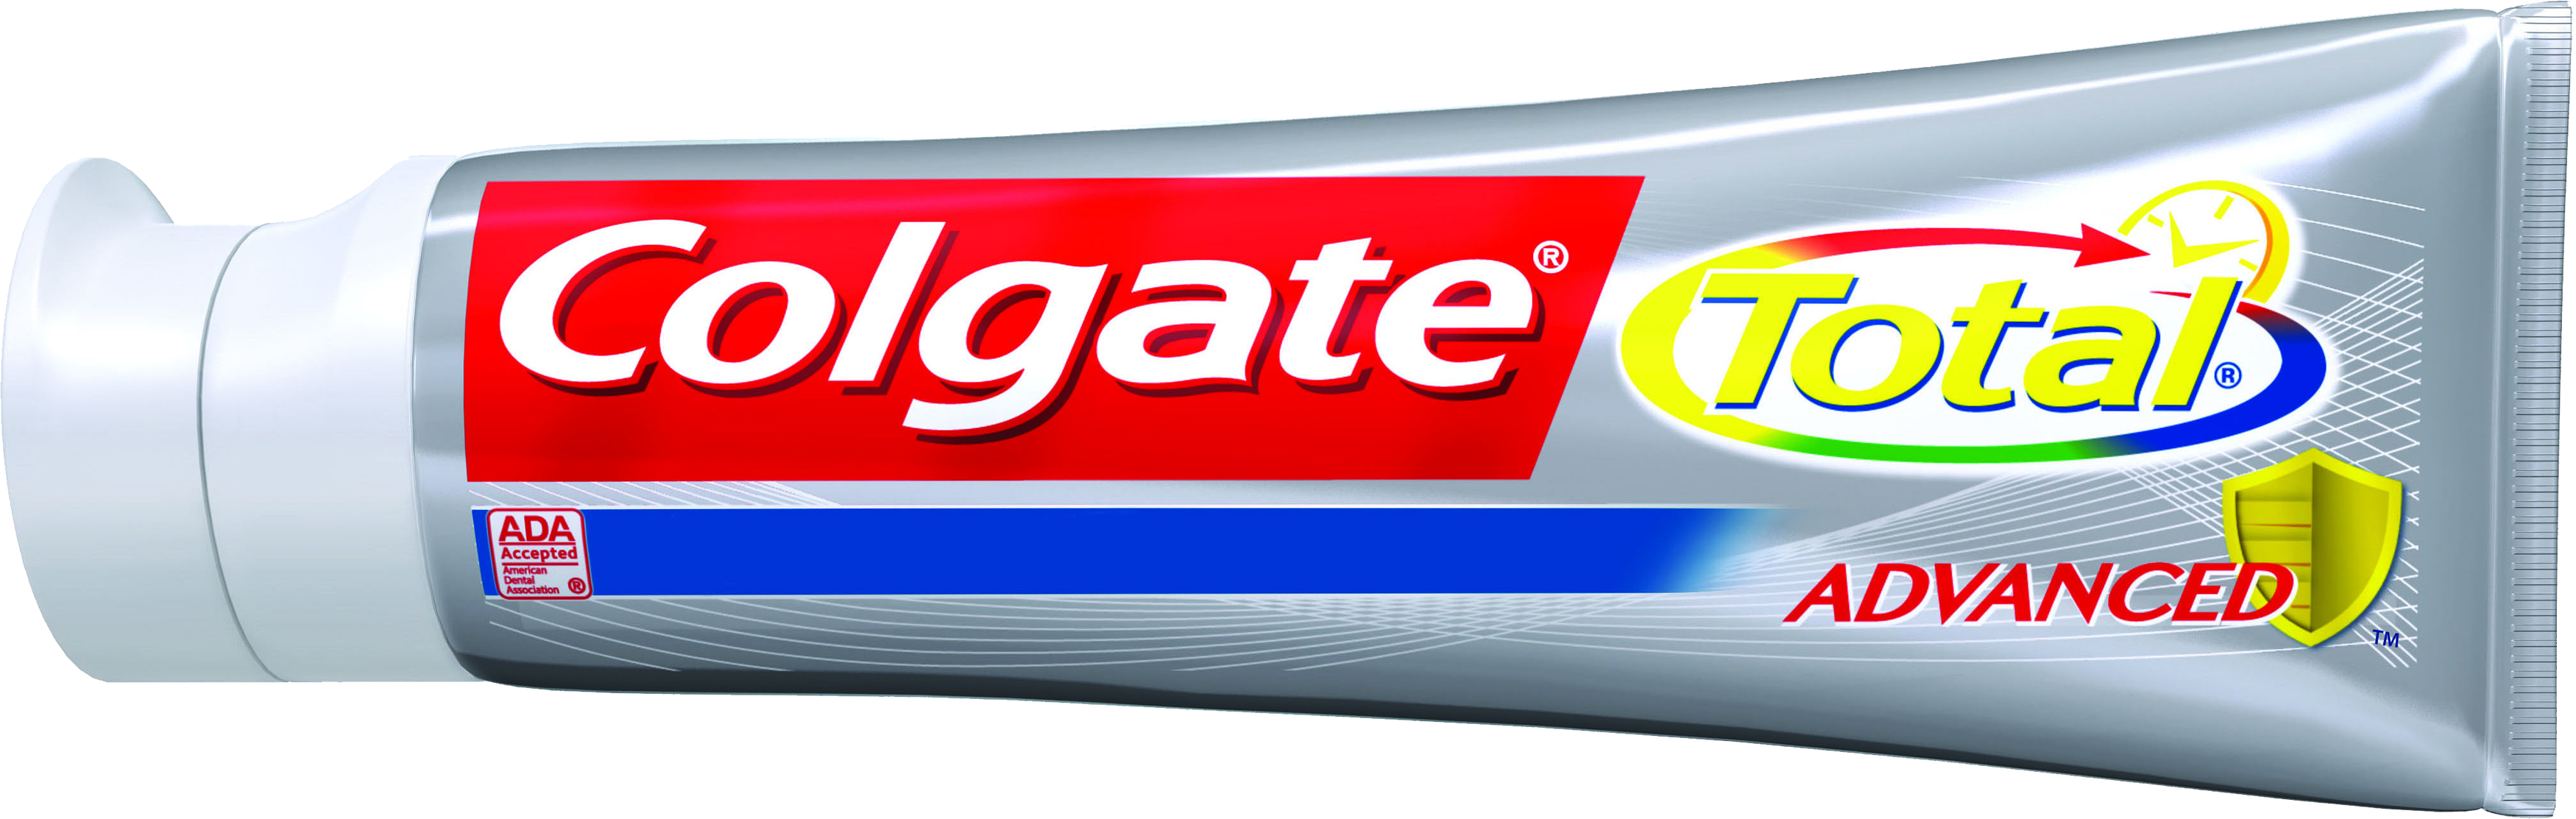 Toothpaste HD PNG - 118249